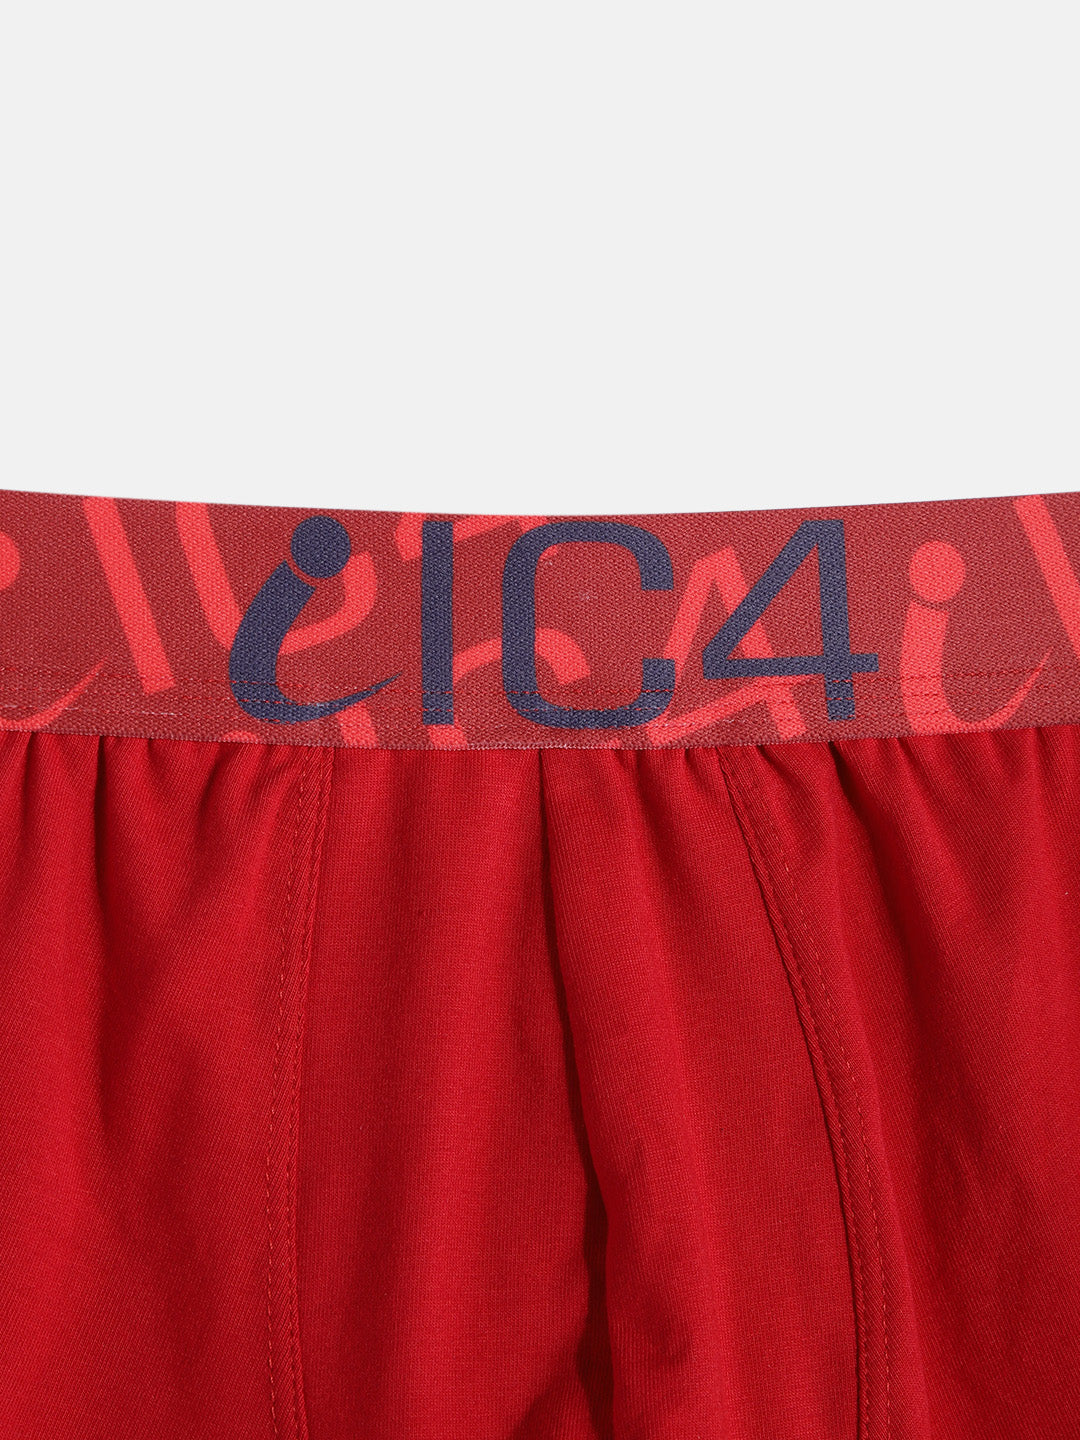 IC4 Boy's Fashion Trunk Combo Pack of 2, Red Color